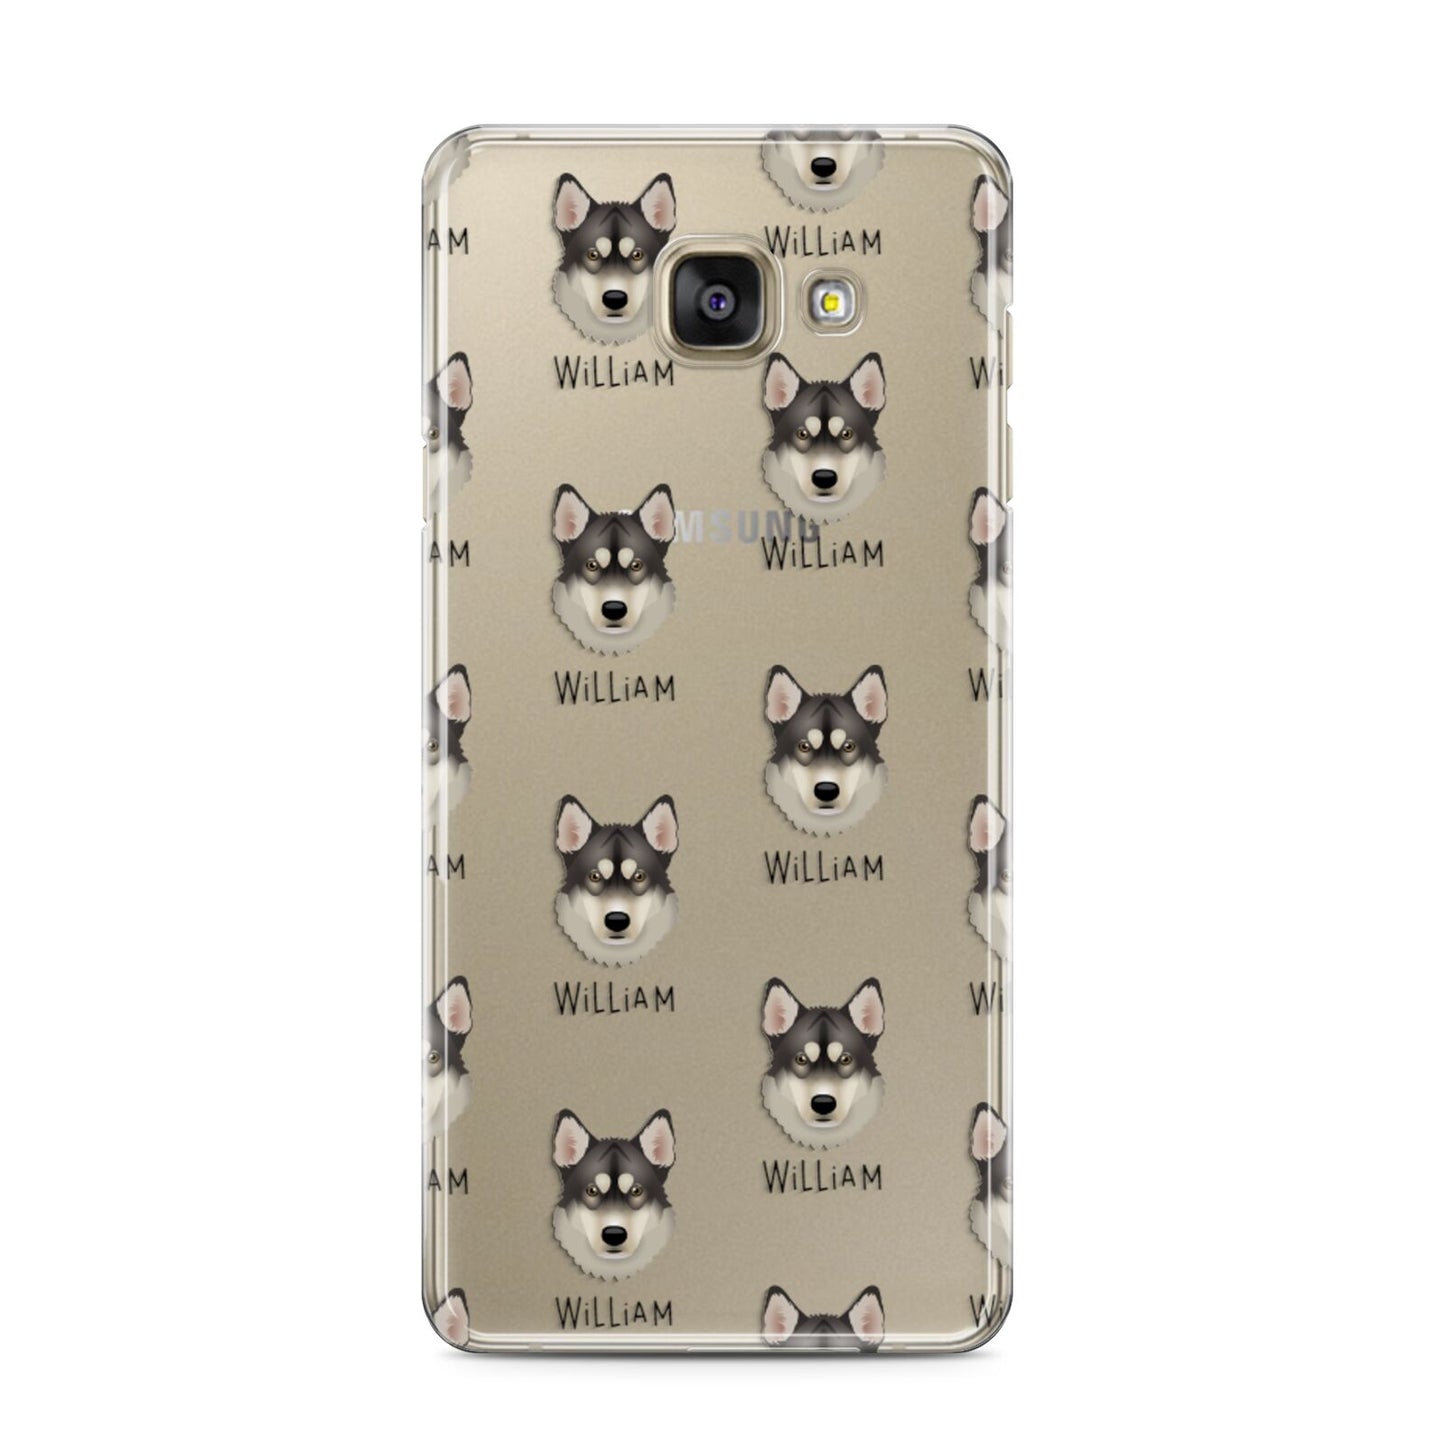 Tamaskan Icon with Name Samsung Galaxy A3 2016 Case on gold phone